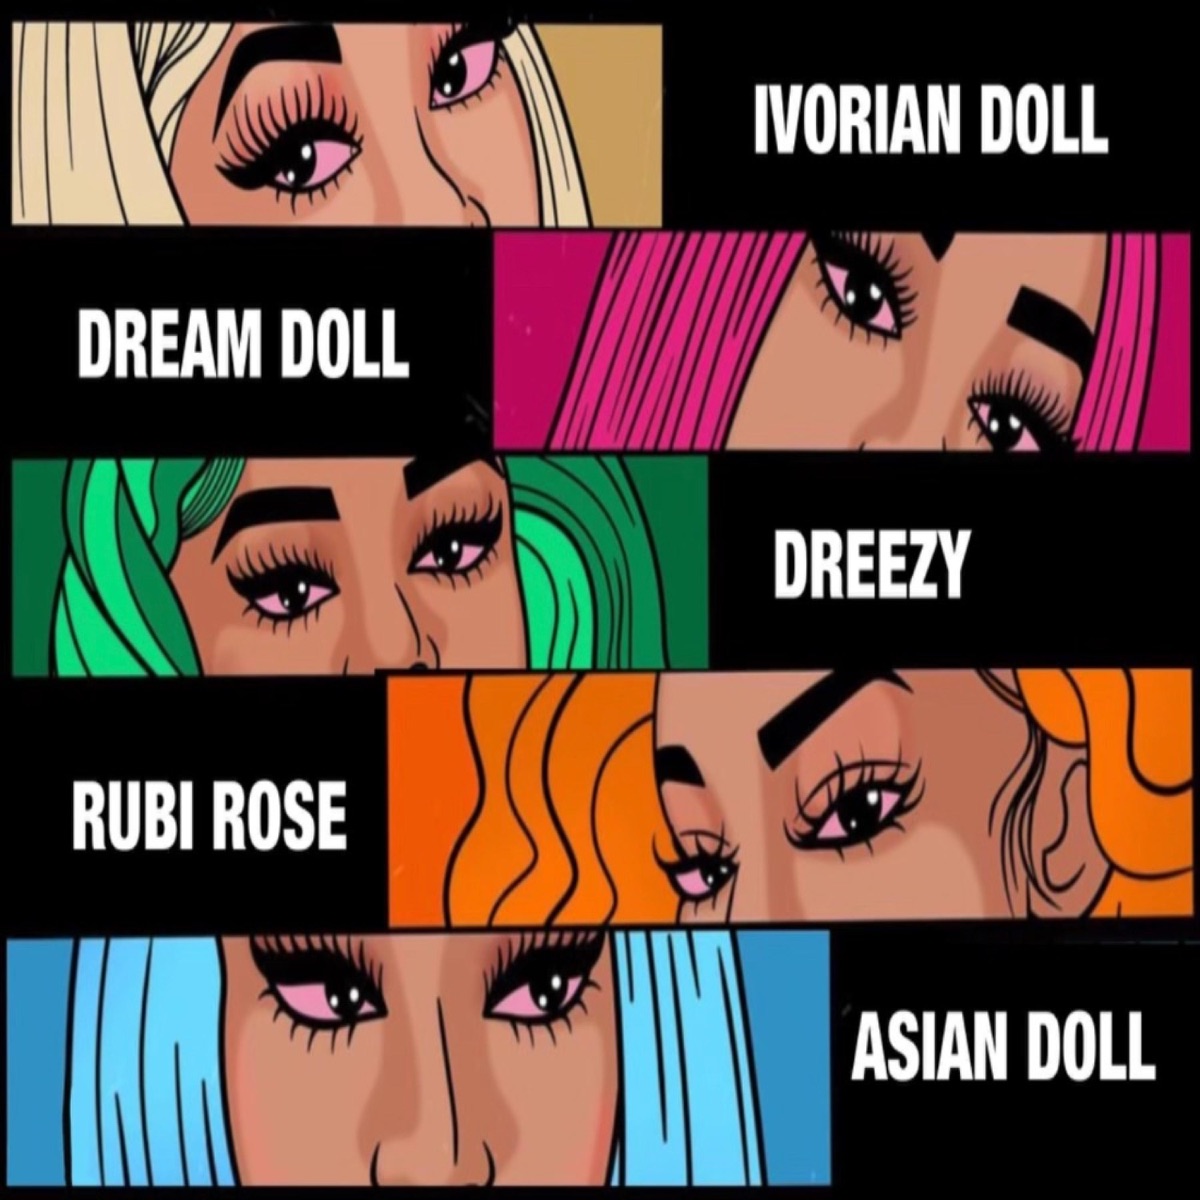 Asian Doll featuring RUBY ROSE, DreamDoll, Dreezy, & Ivorian Doll — Nunnadet Shit (Remix) cover artwork